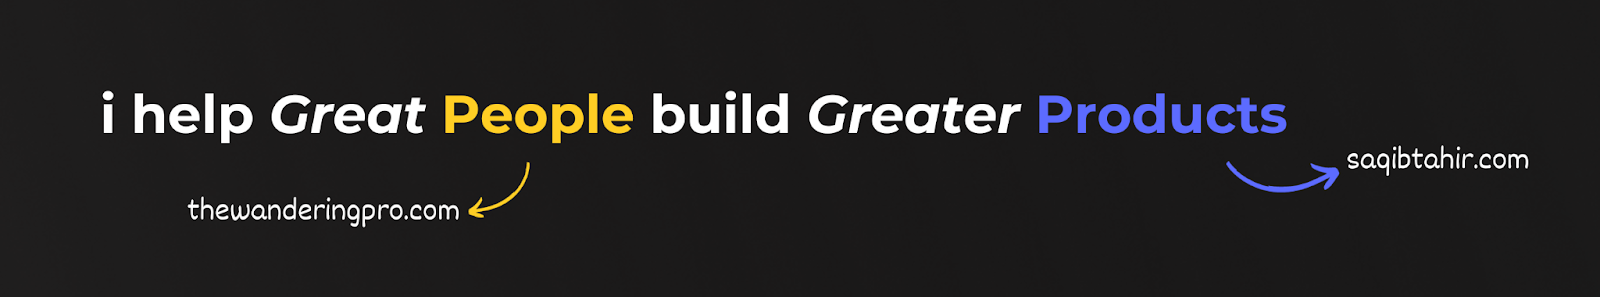 tagline: i help great people build greater products